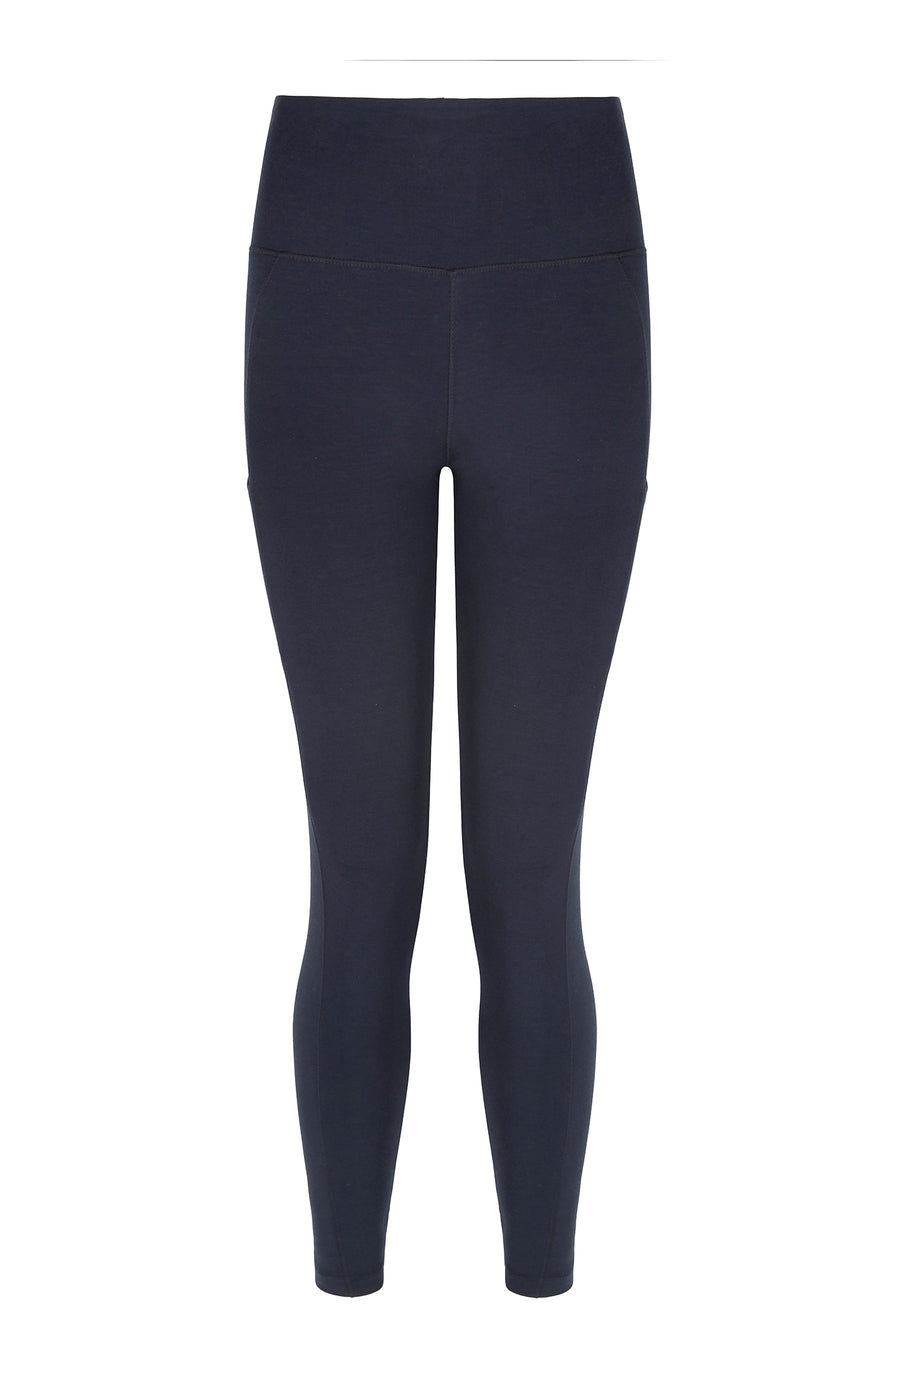 Asquith London Navy Leggings With Pockets